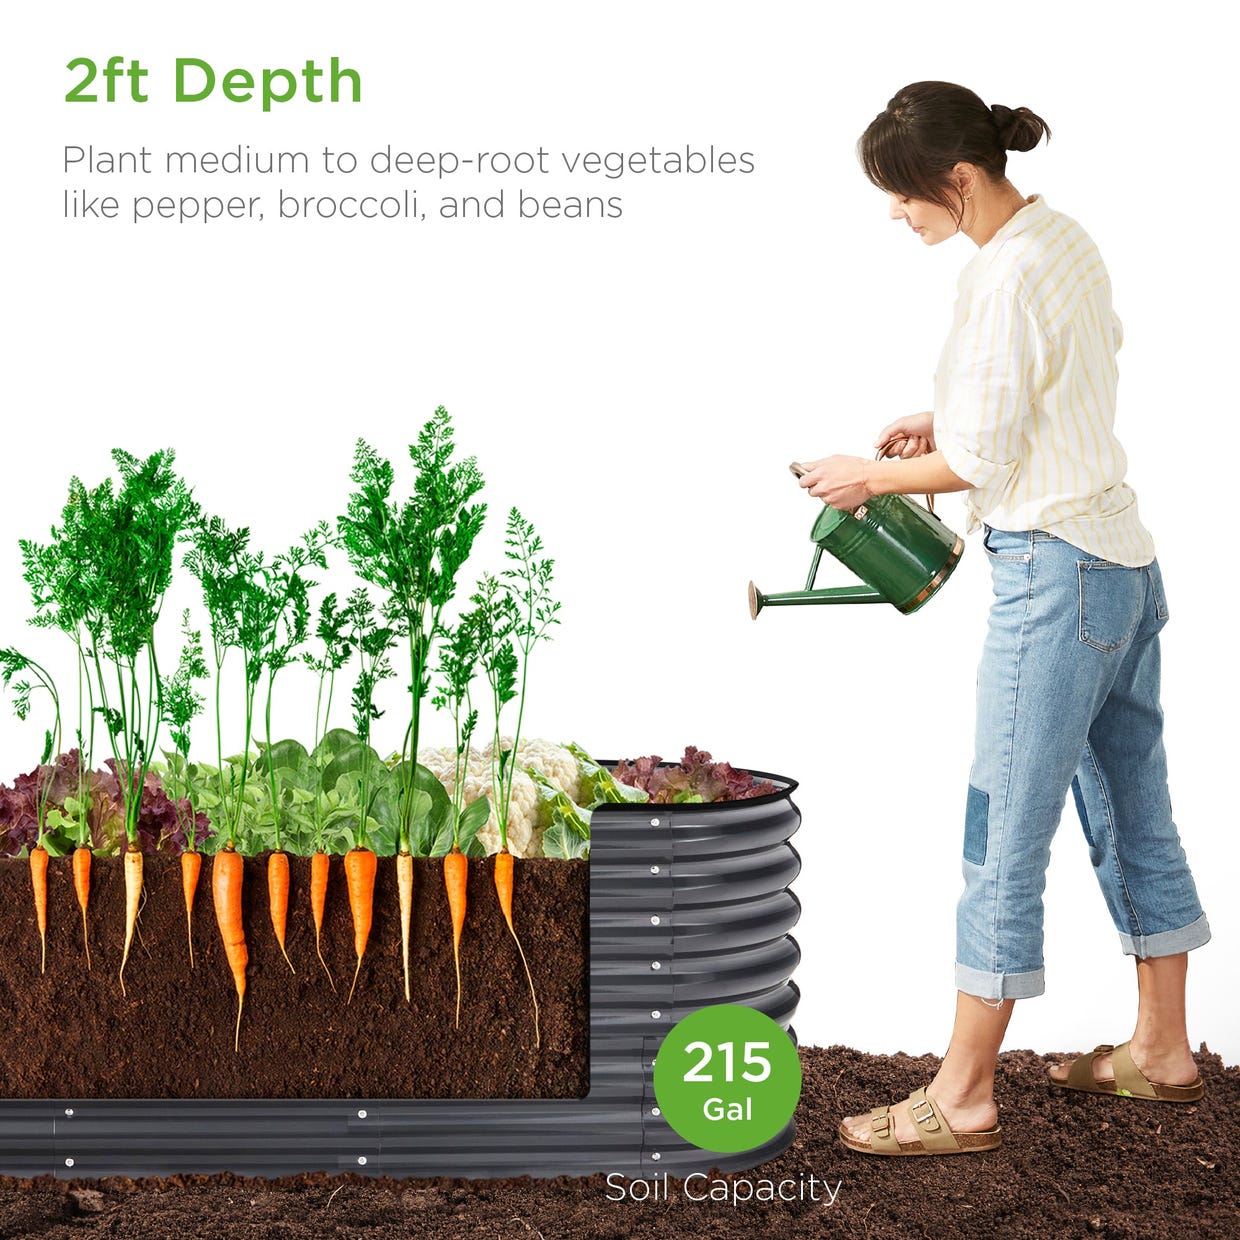 An oval garden bed with a depth of 2 feet, suitable for medium to deep-root vegetables such as carrots, peppers, broccoli, and beans, has a soil capacity of 215 gallons. A person is watering the plants.